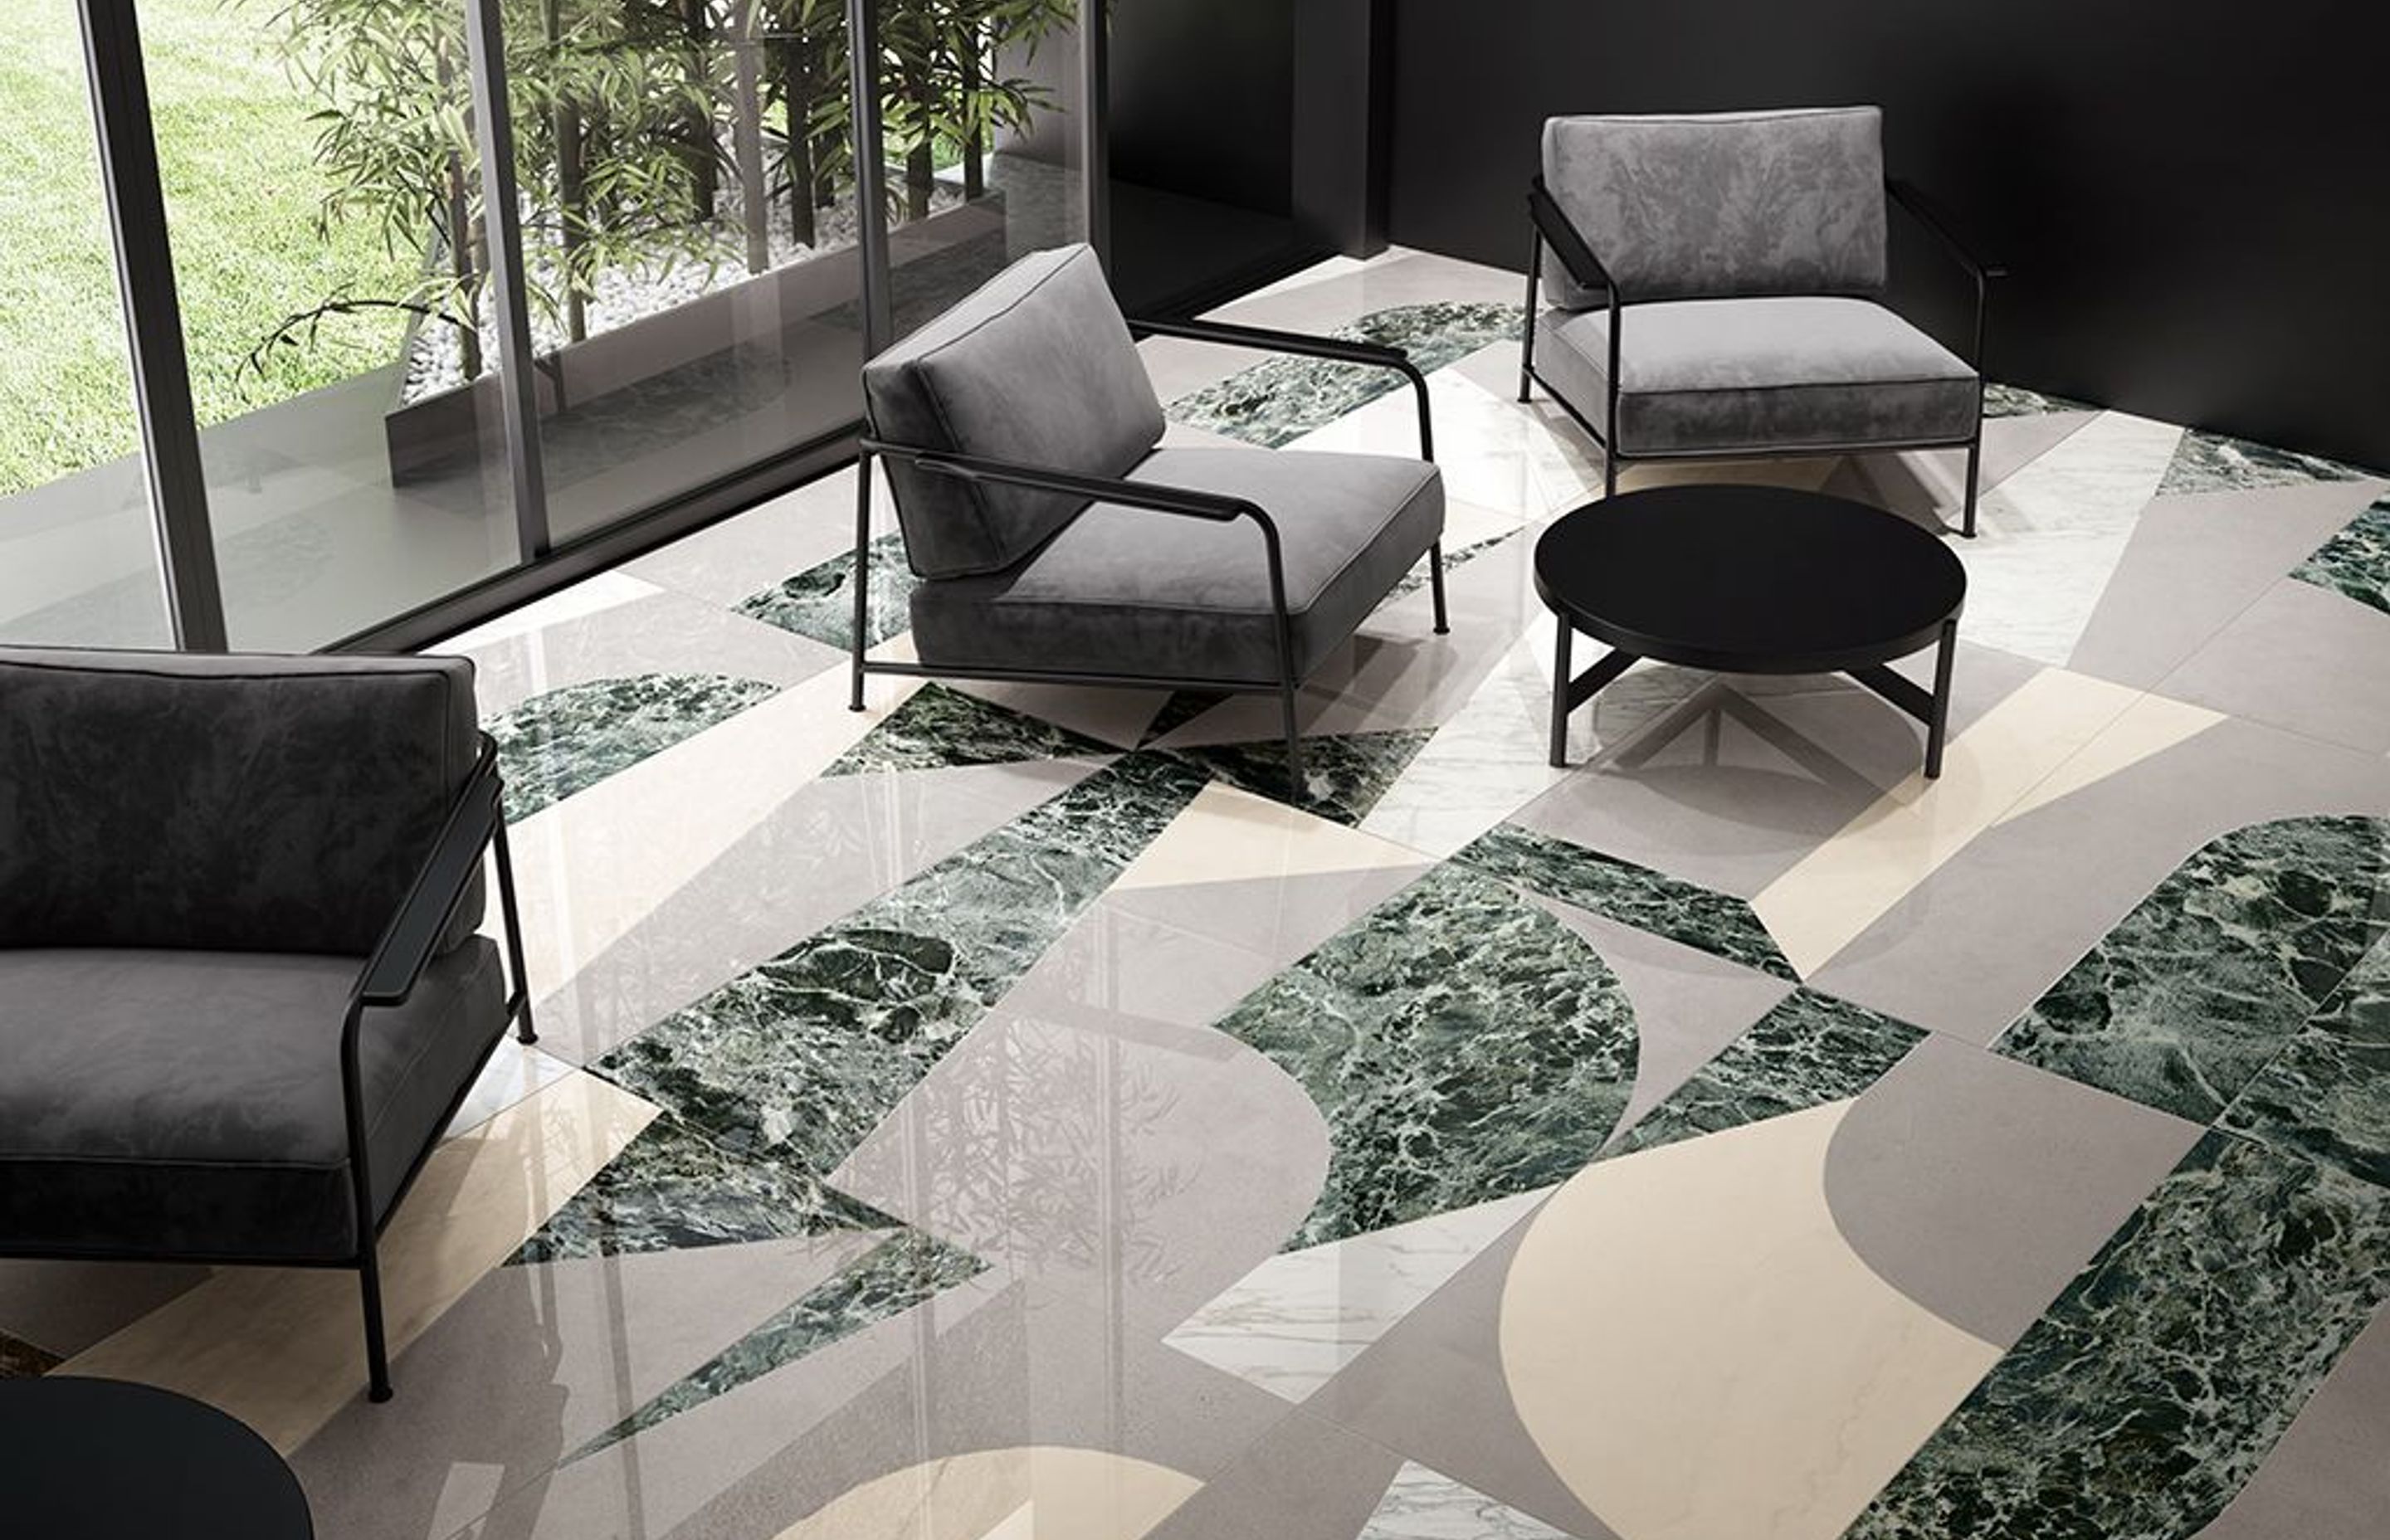 The Fiomood Verde tiles from the Sound of Marbles Collection come in two sizes—74 x 148cm and 30 x 60cm—and 38 assorted patterns for an almost infinite range of design possibilities.